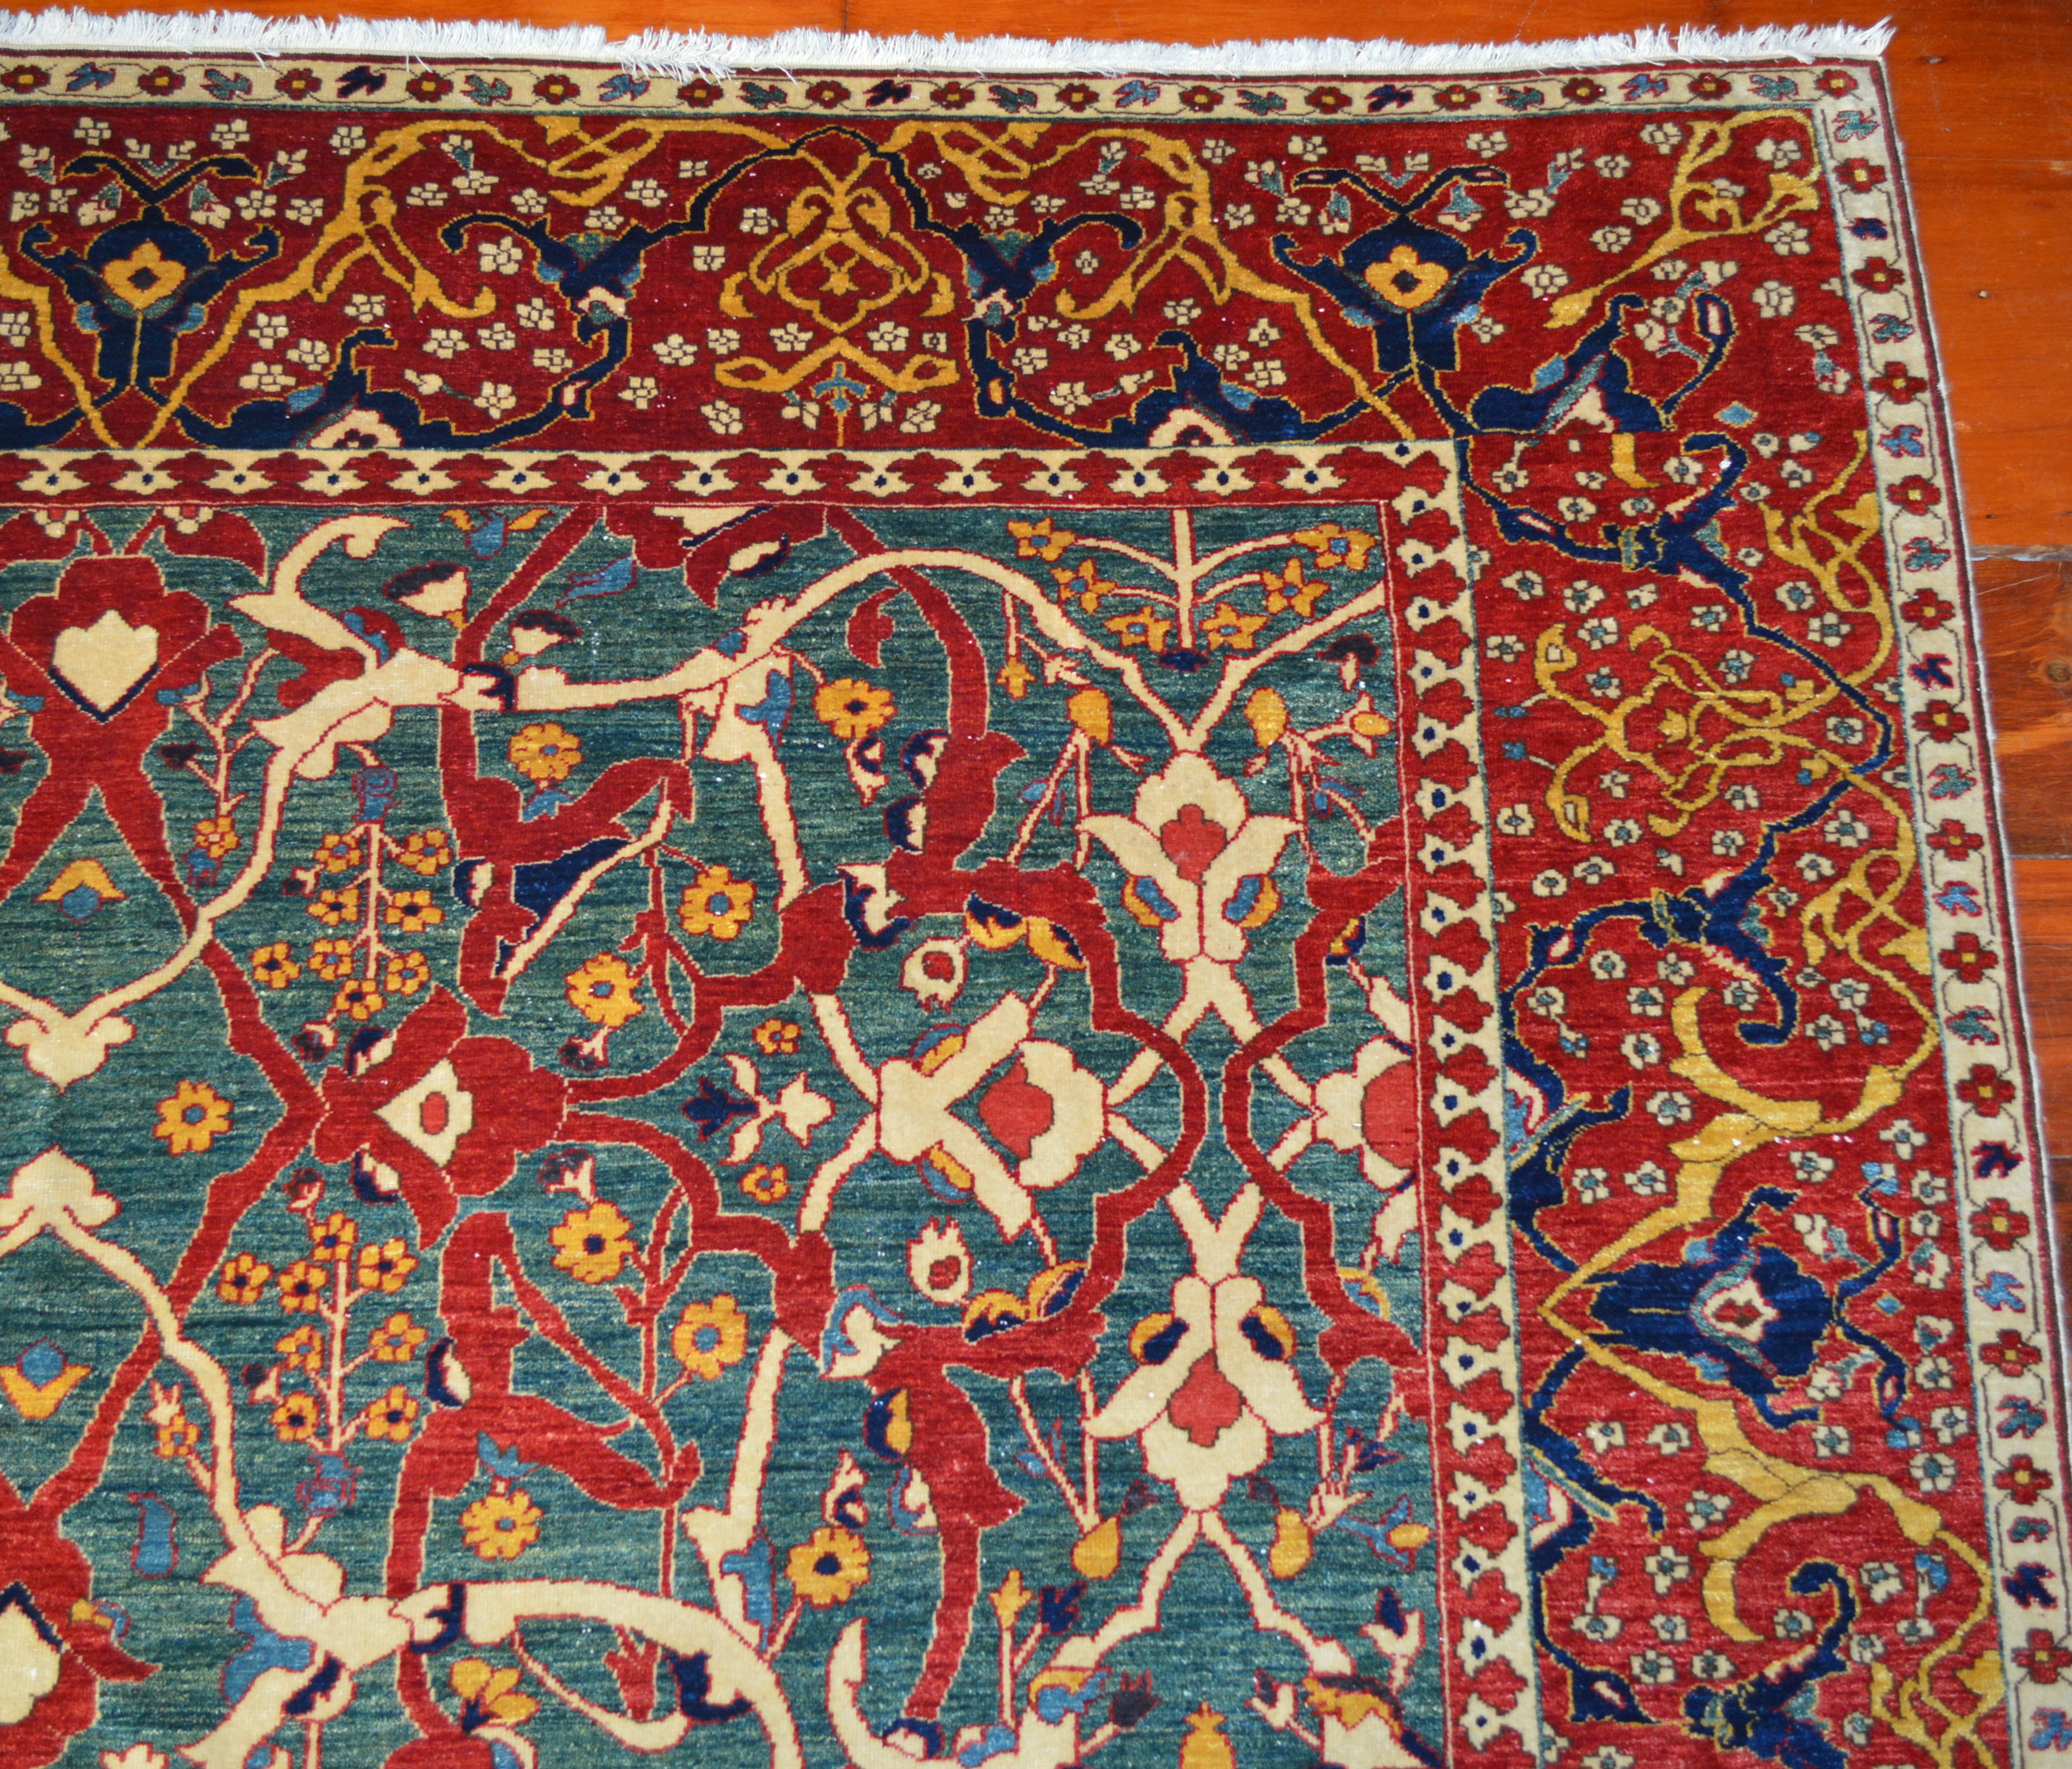 A contemporary hand woven carpet from Azerbaijan with an Arabesque design on a green field. Douglas tock Gallery, Oriental rugs South Natick,MA